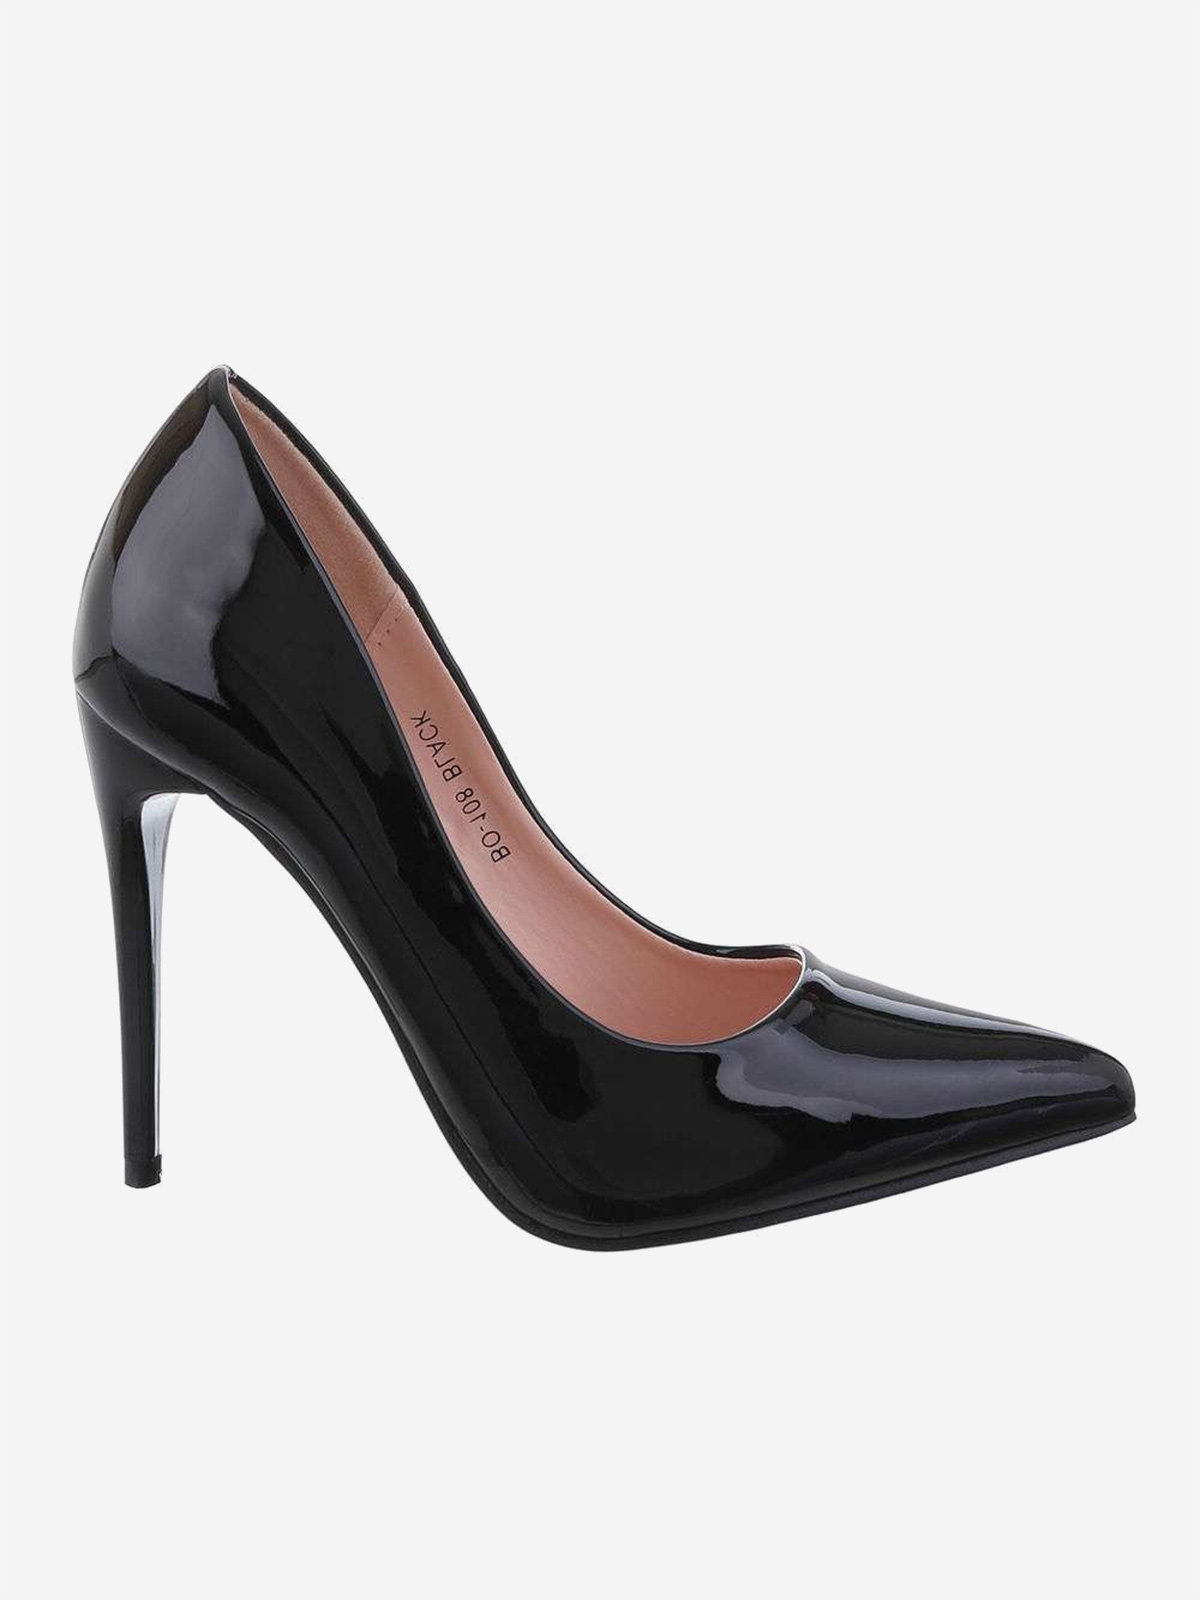 Women's high-heeled shoes in black